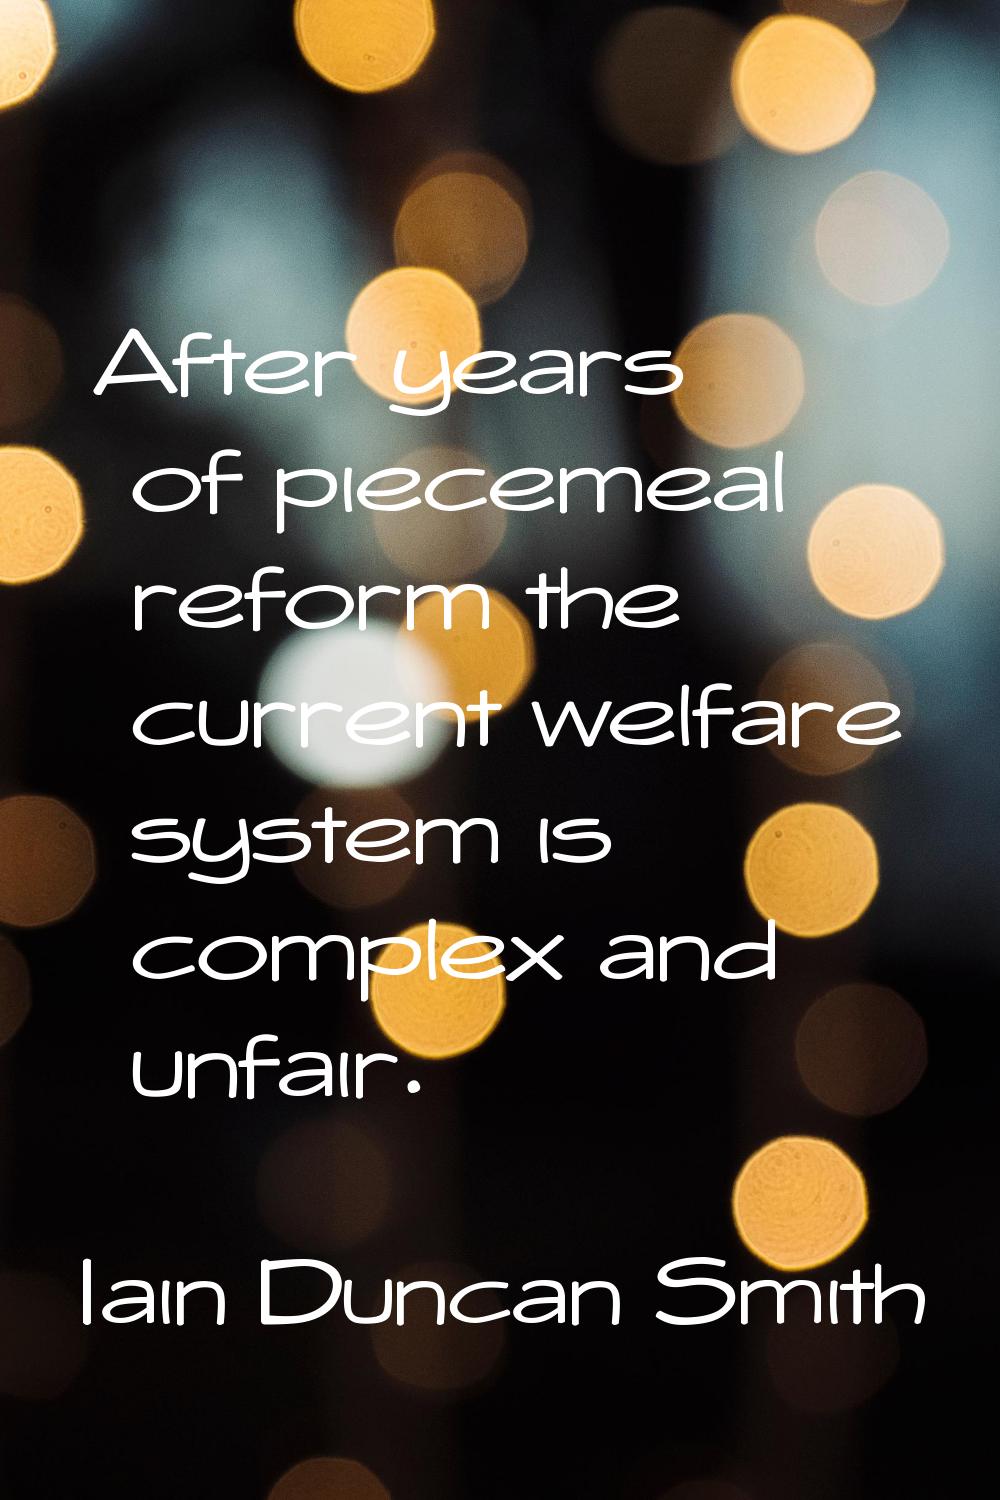 After years of piecemeal reform the current welfare system is complex and unfair.